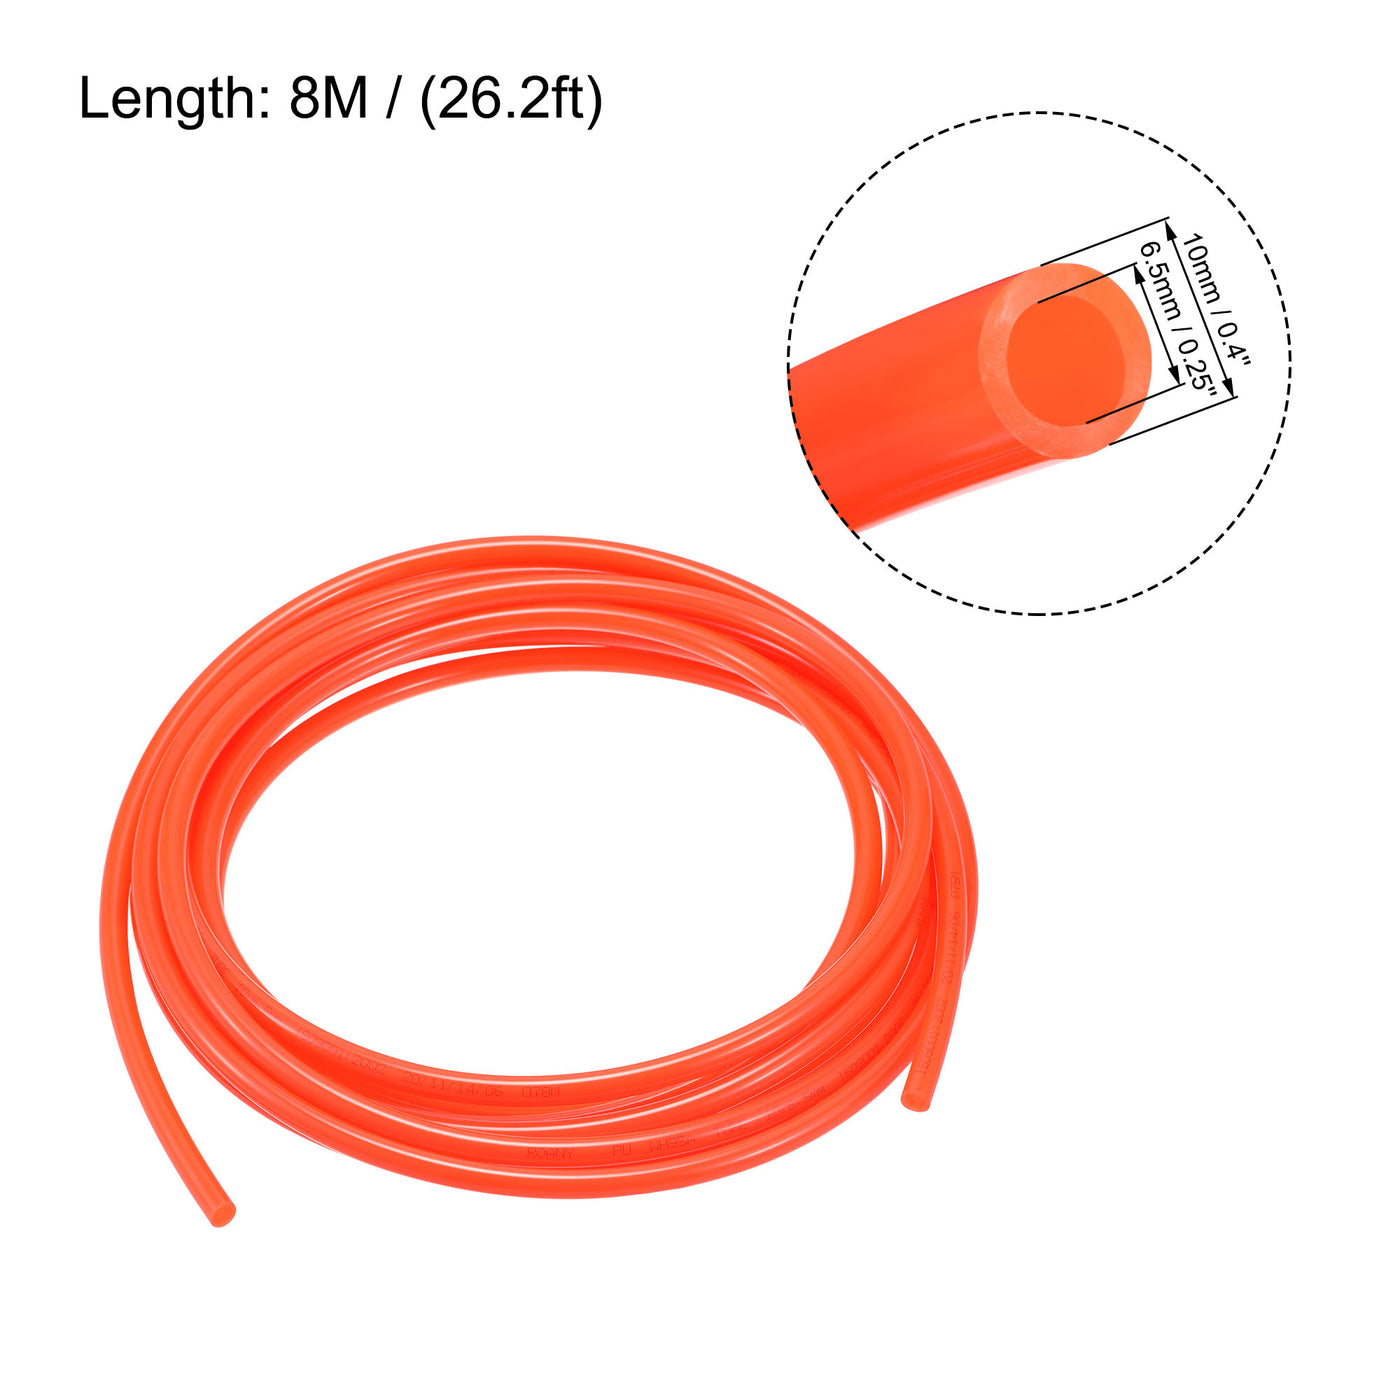 uxcell Uxcell Pneumatic Air Hose Tubing Air Compressor Tube 6.5mm/0.25''ID x 10mm/0.4''OD x 8m/26.2Ft Polyurethane Pipe Bright Orange